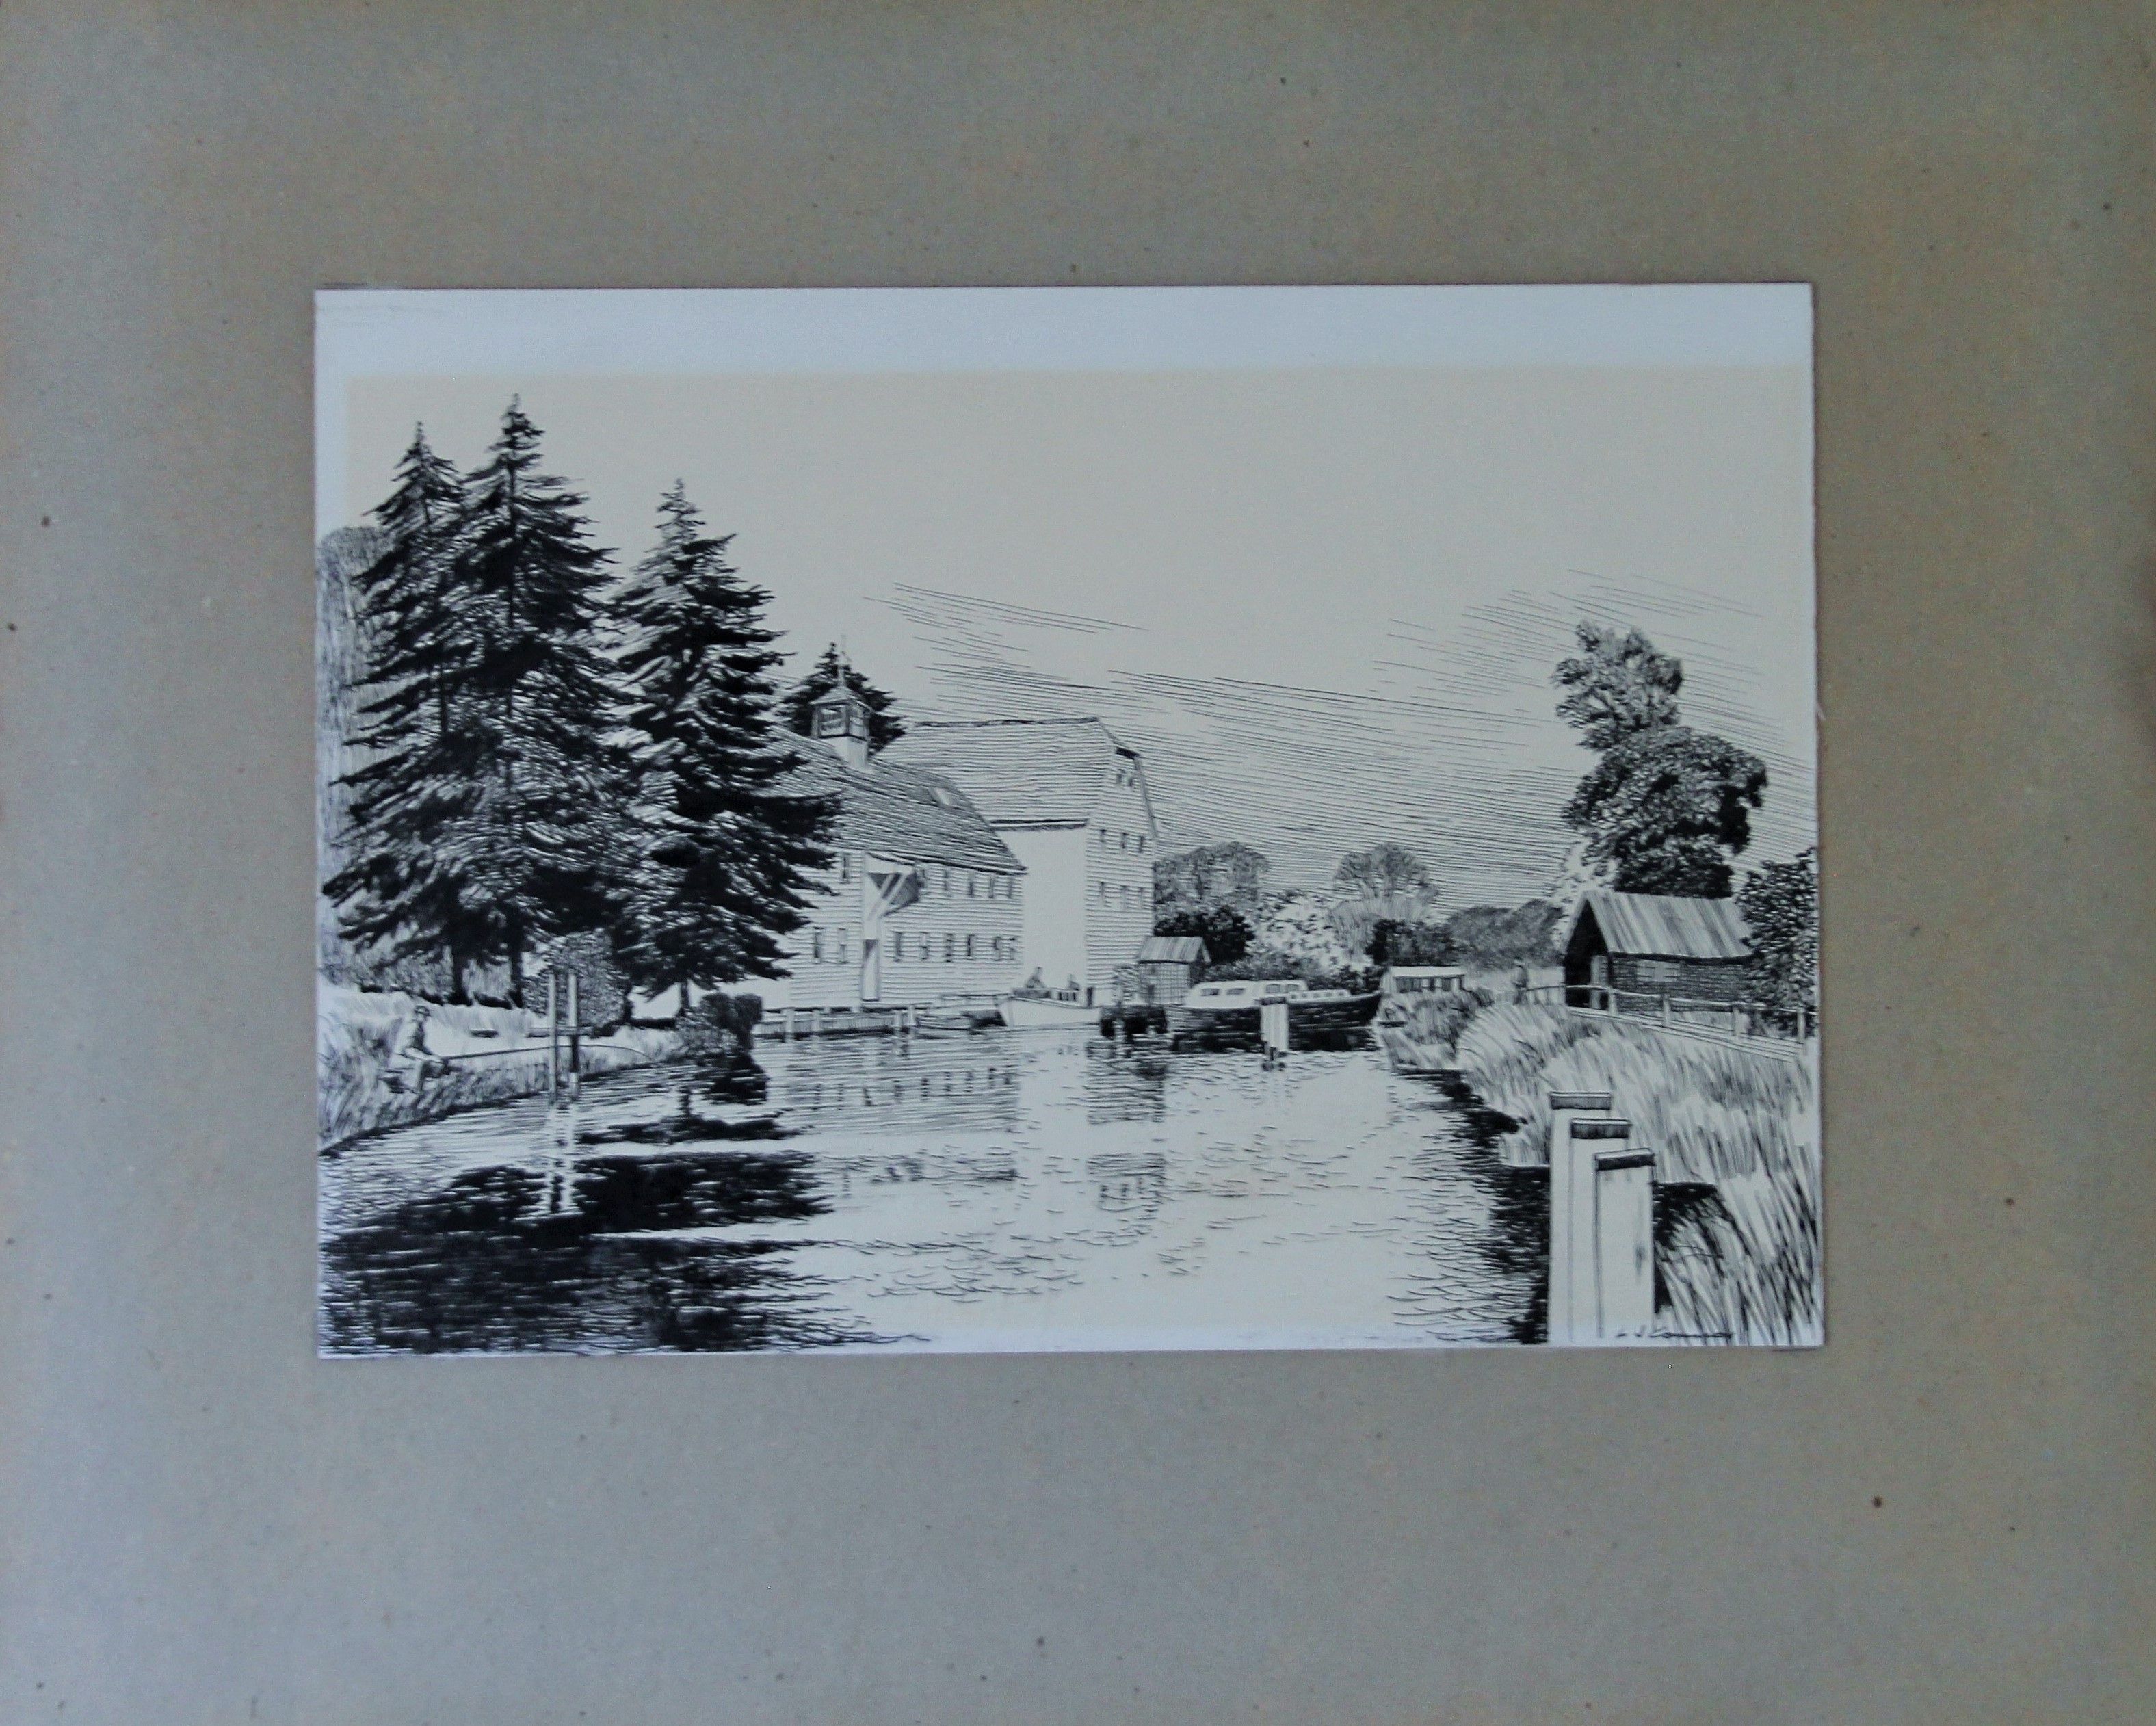 CONNOR, L J (20th century) British (AR), Hambledon Mill, pen and ink on board. 23 x 36 cm. - Image 2 of 3